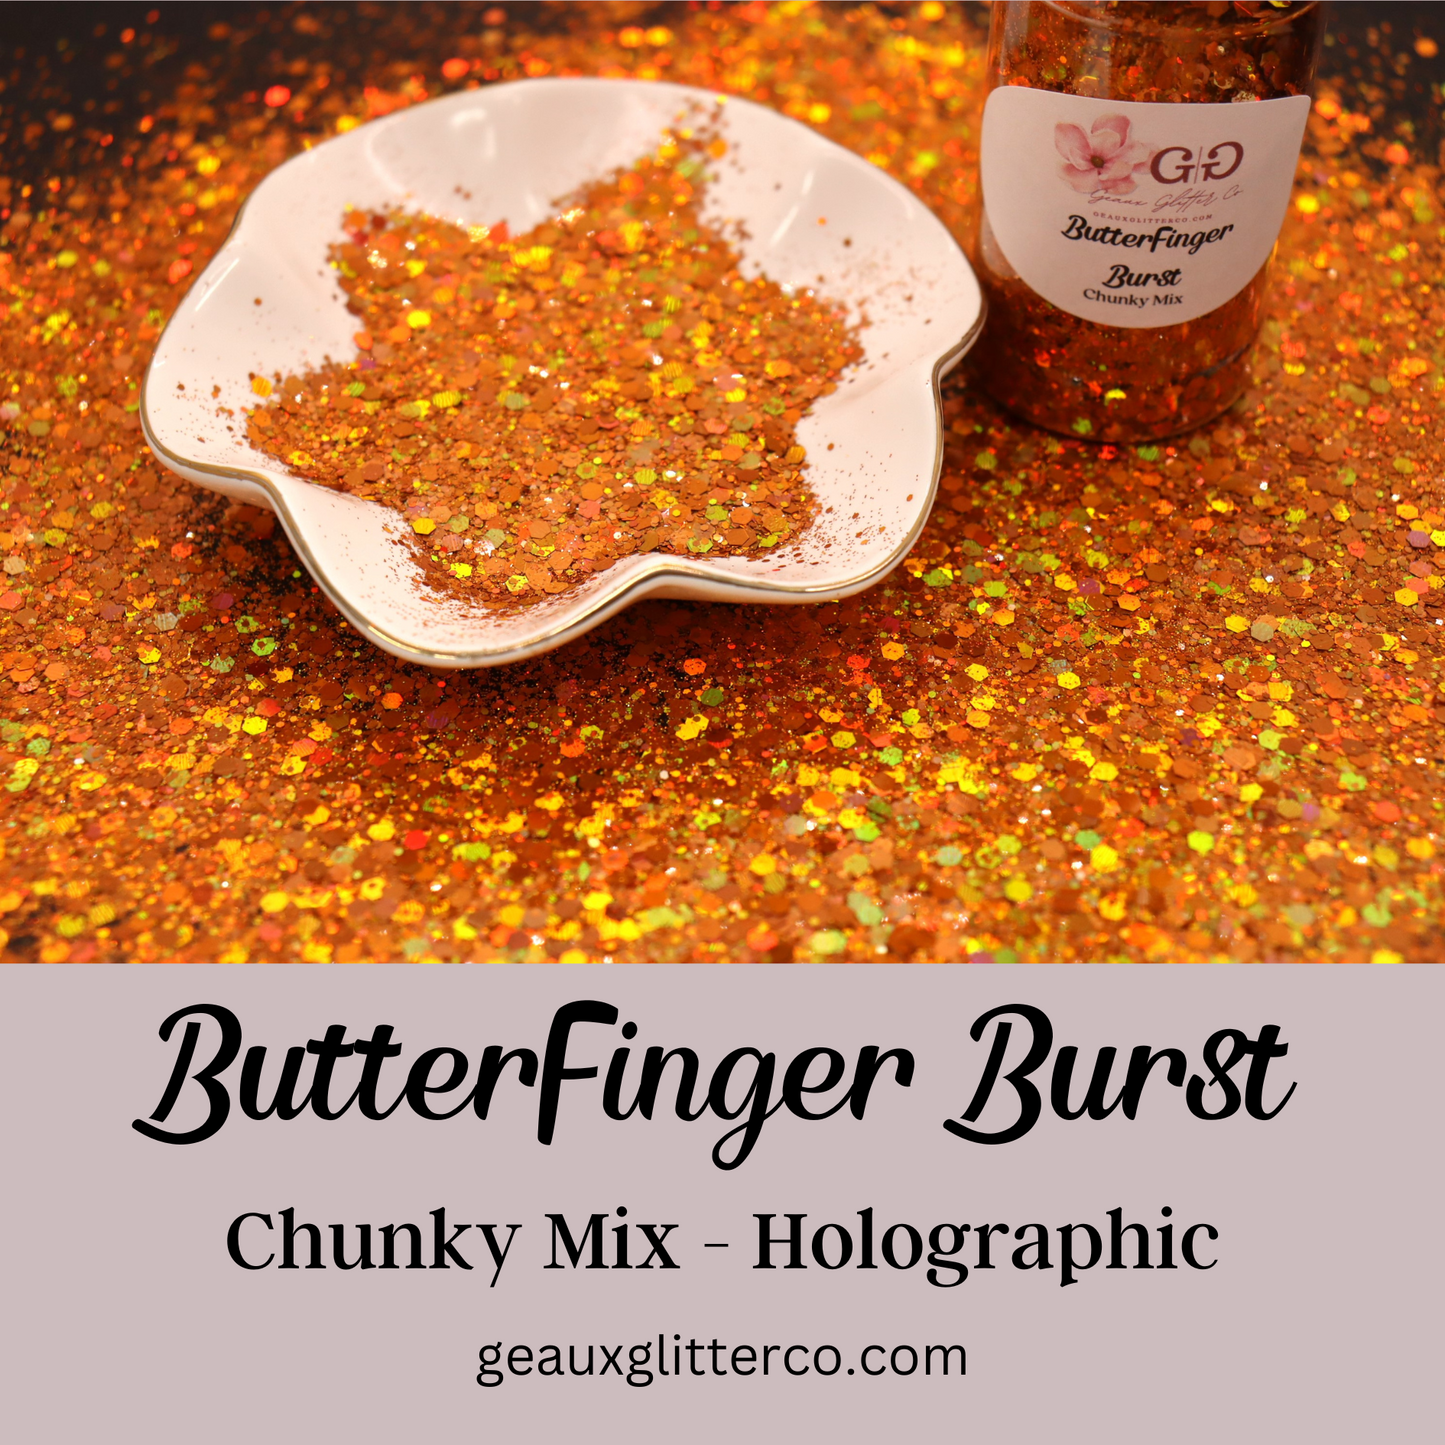 ButterFinger Burst Chunky Mix - Holographic